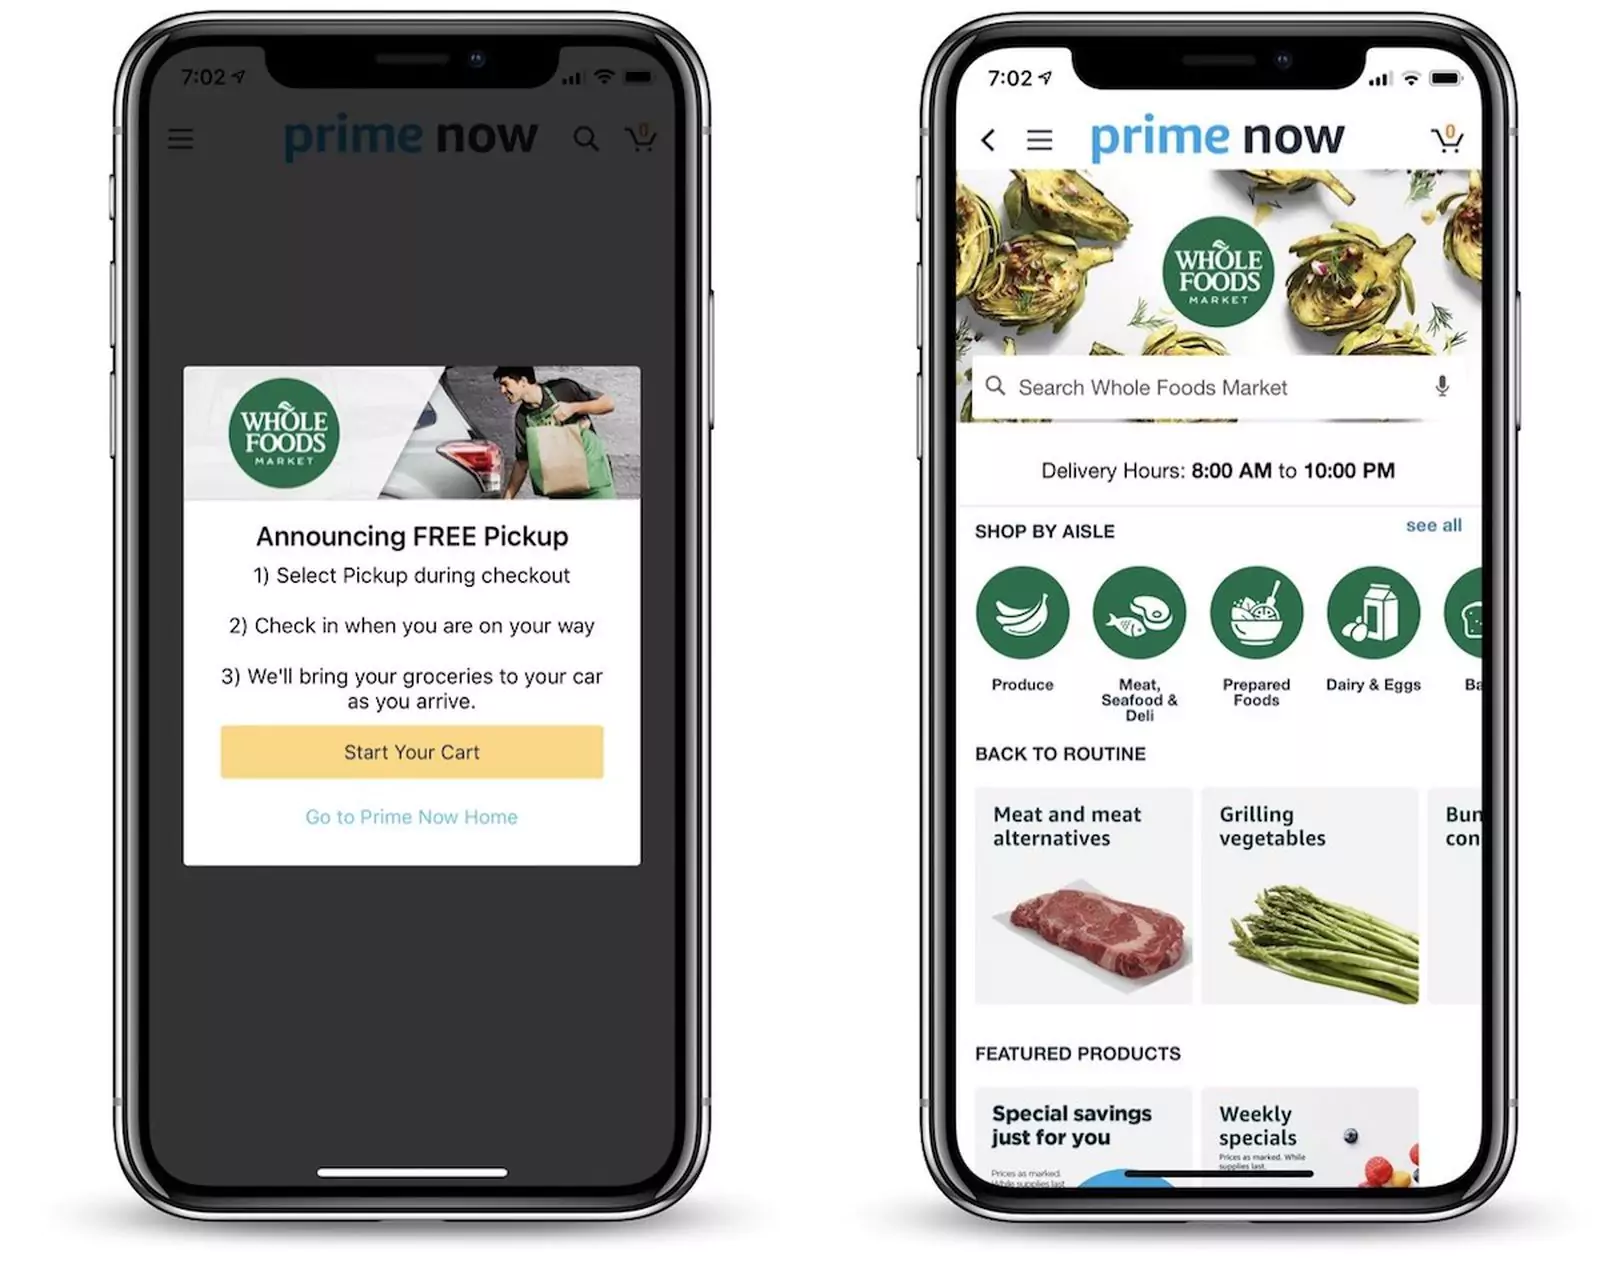 Amazon Prime offers a subscription service that includes additional benefits like free and faster delivery on many items